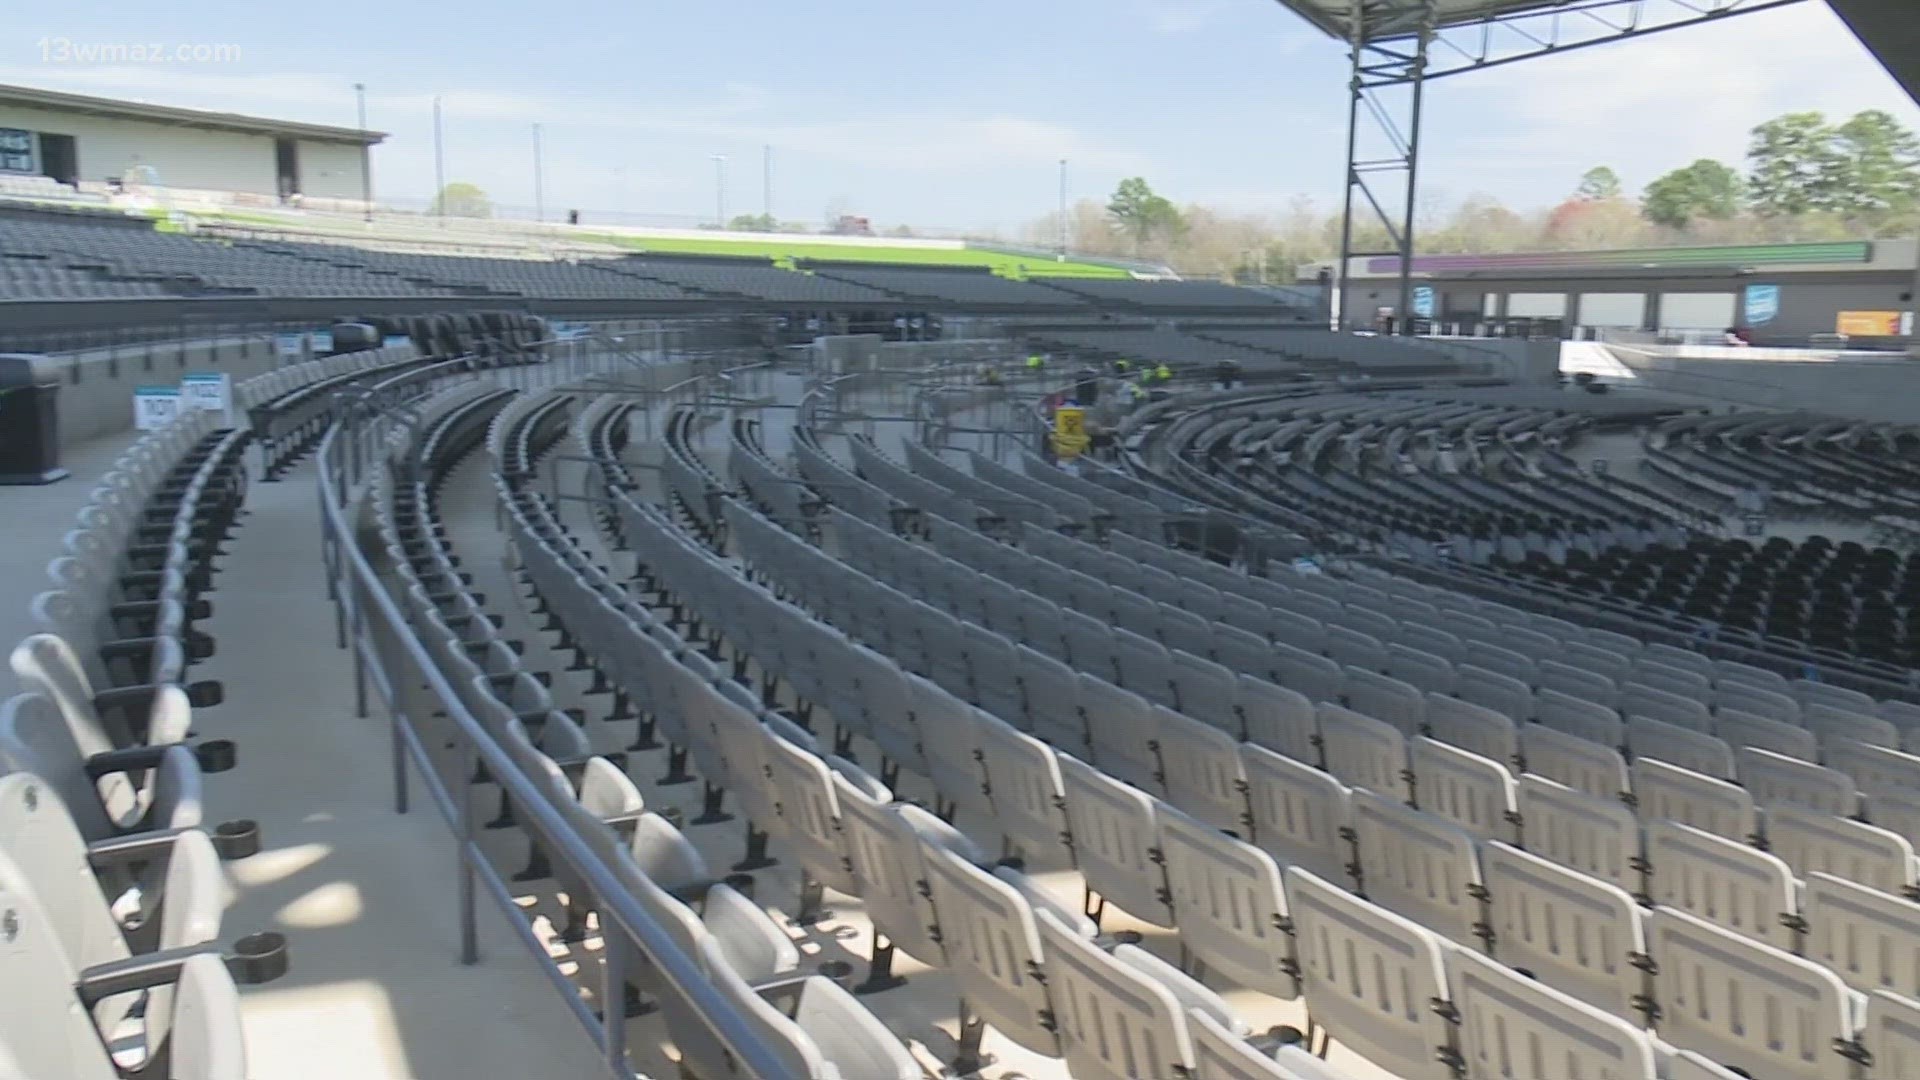 On Tuesday, the amphitheater had a soft opening with a test concert, but neighbors say the noise carried.